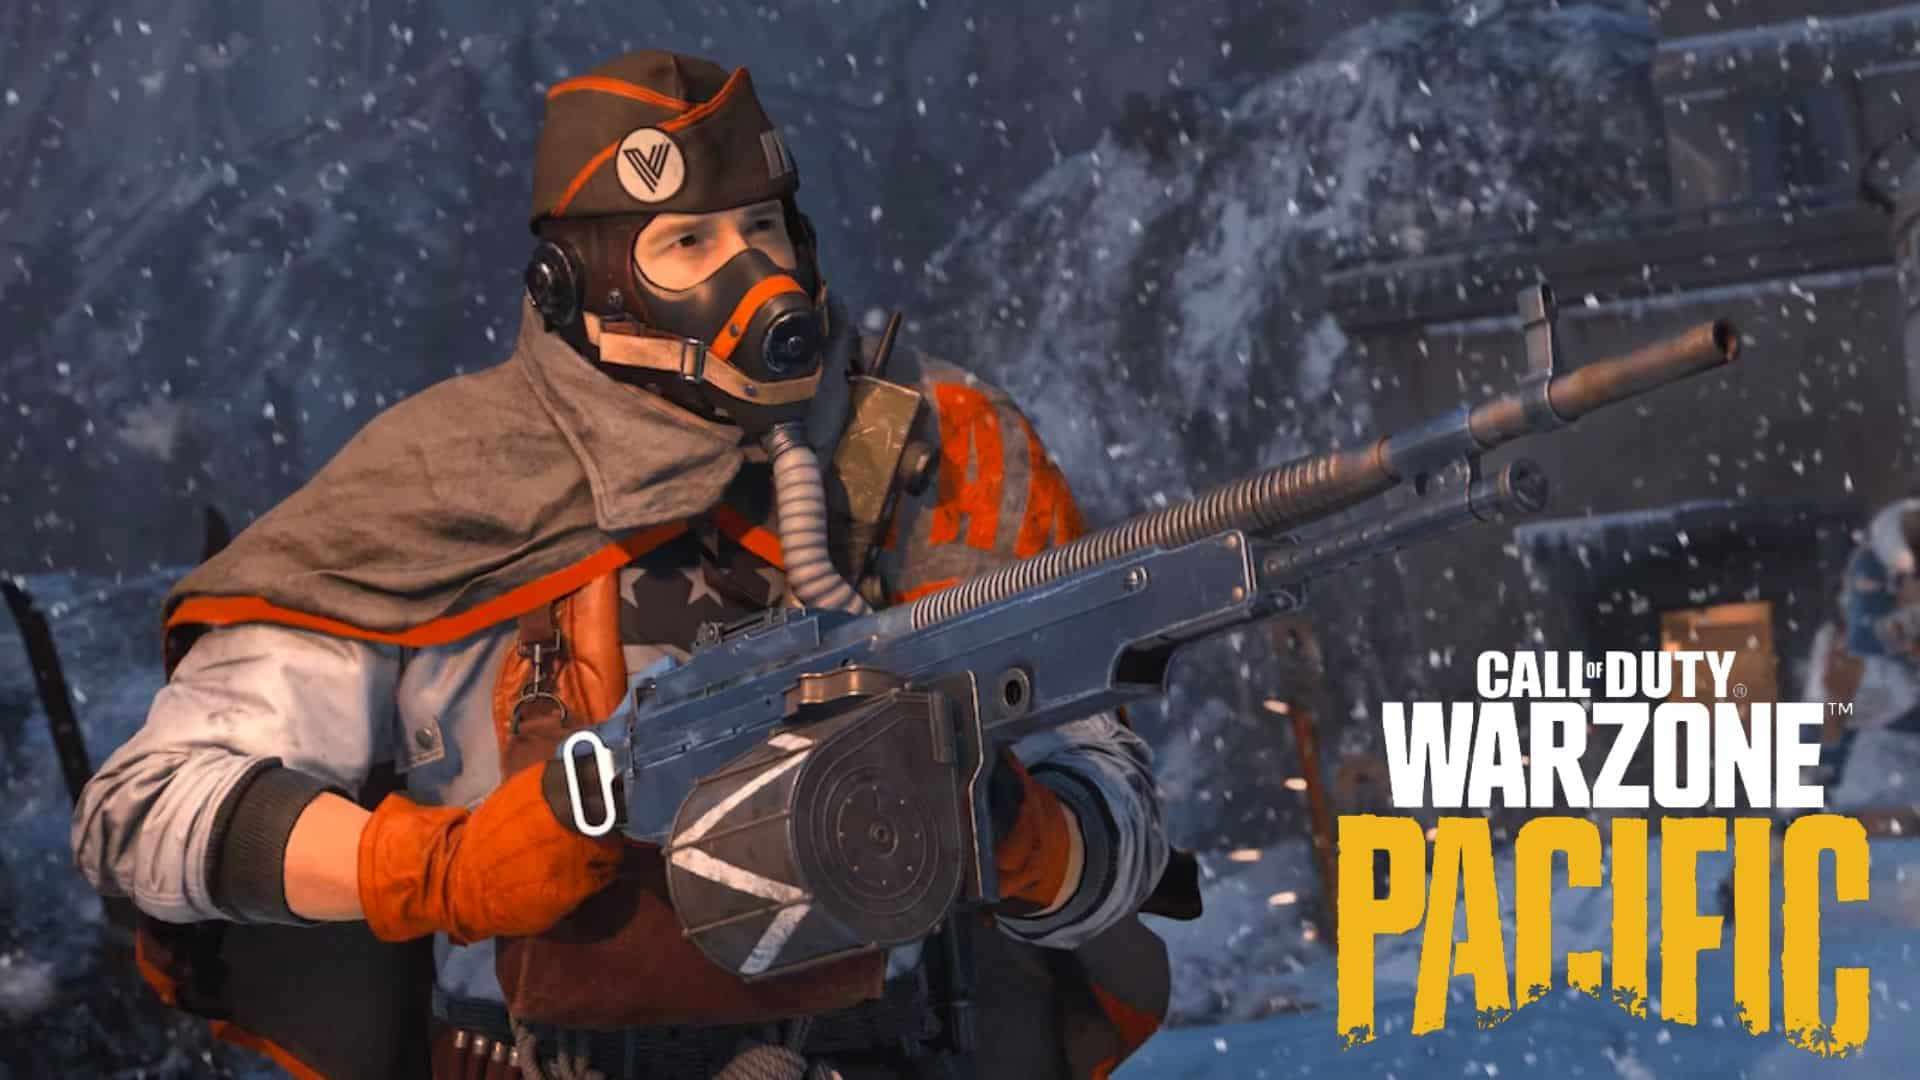 Vanguard character holding Whitley LMG in the snow